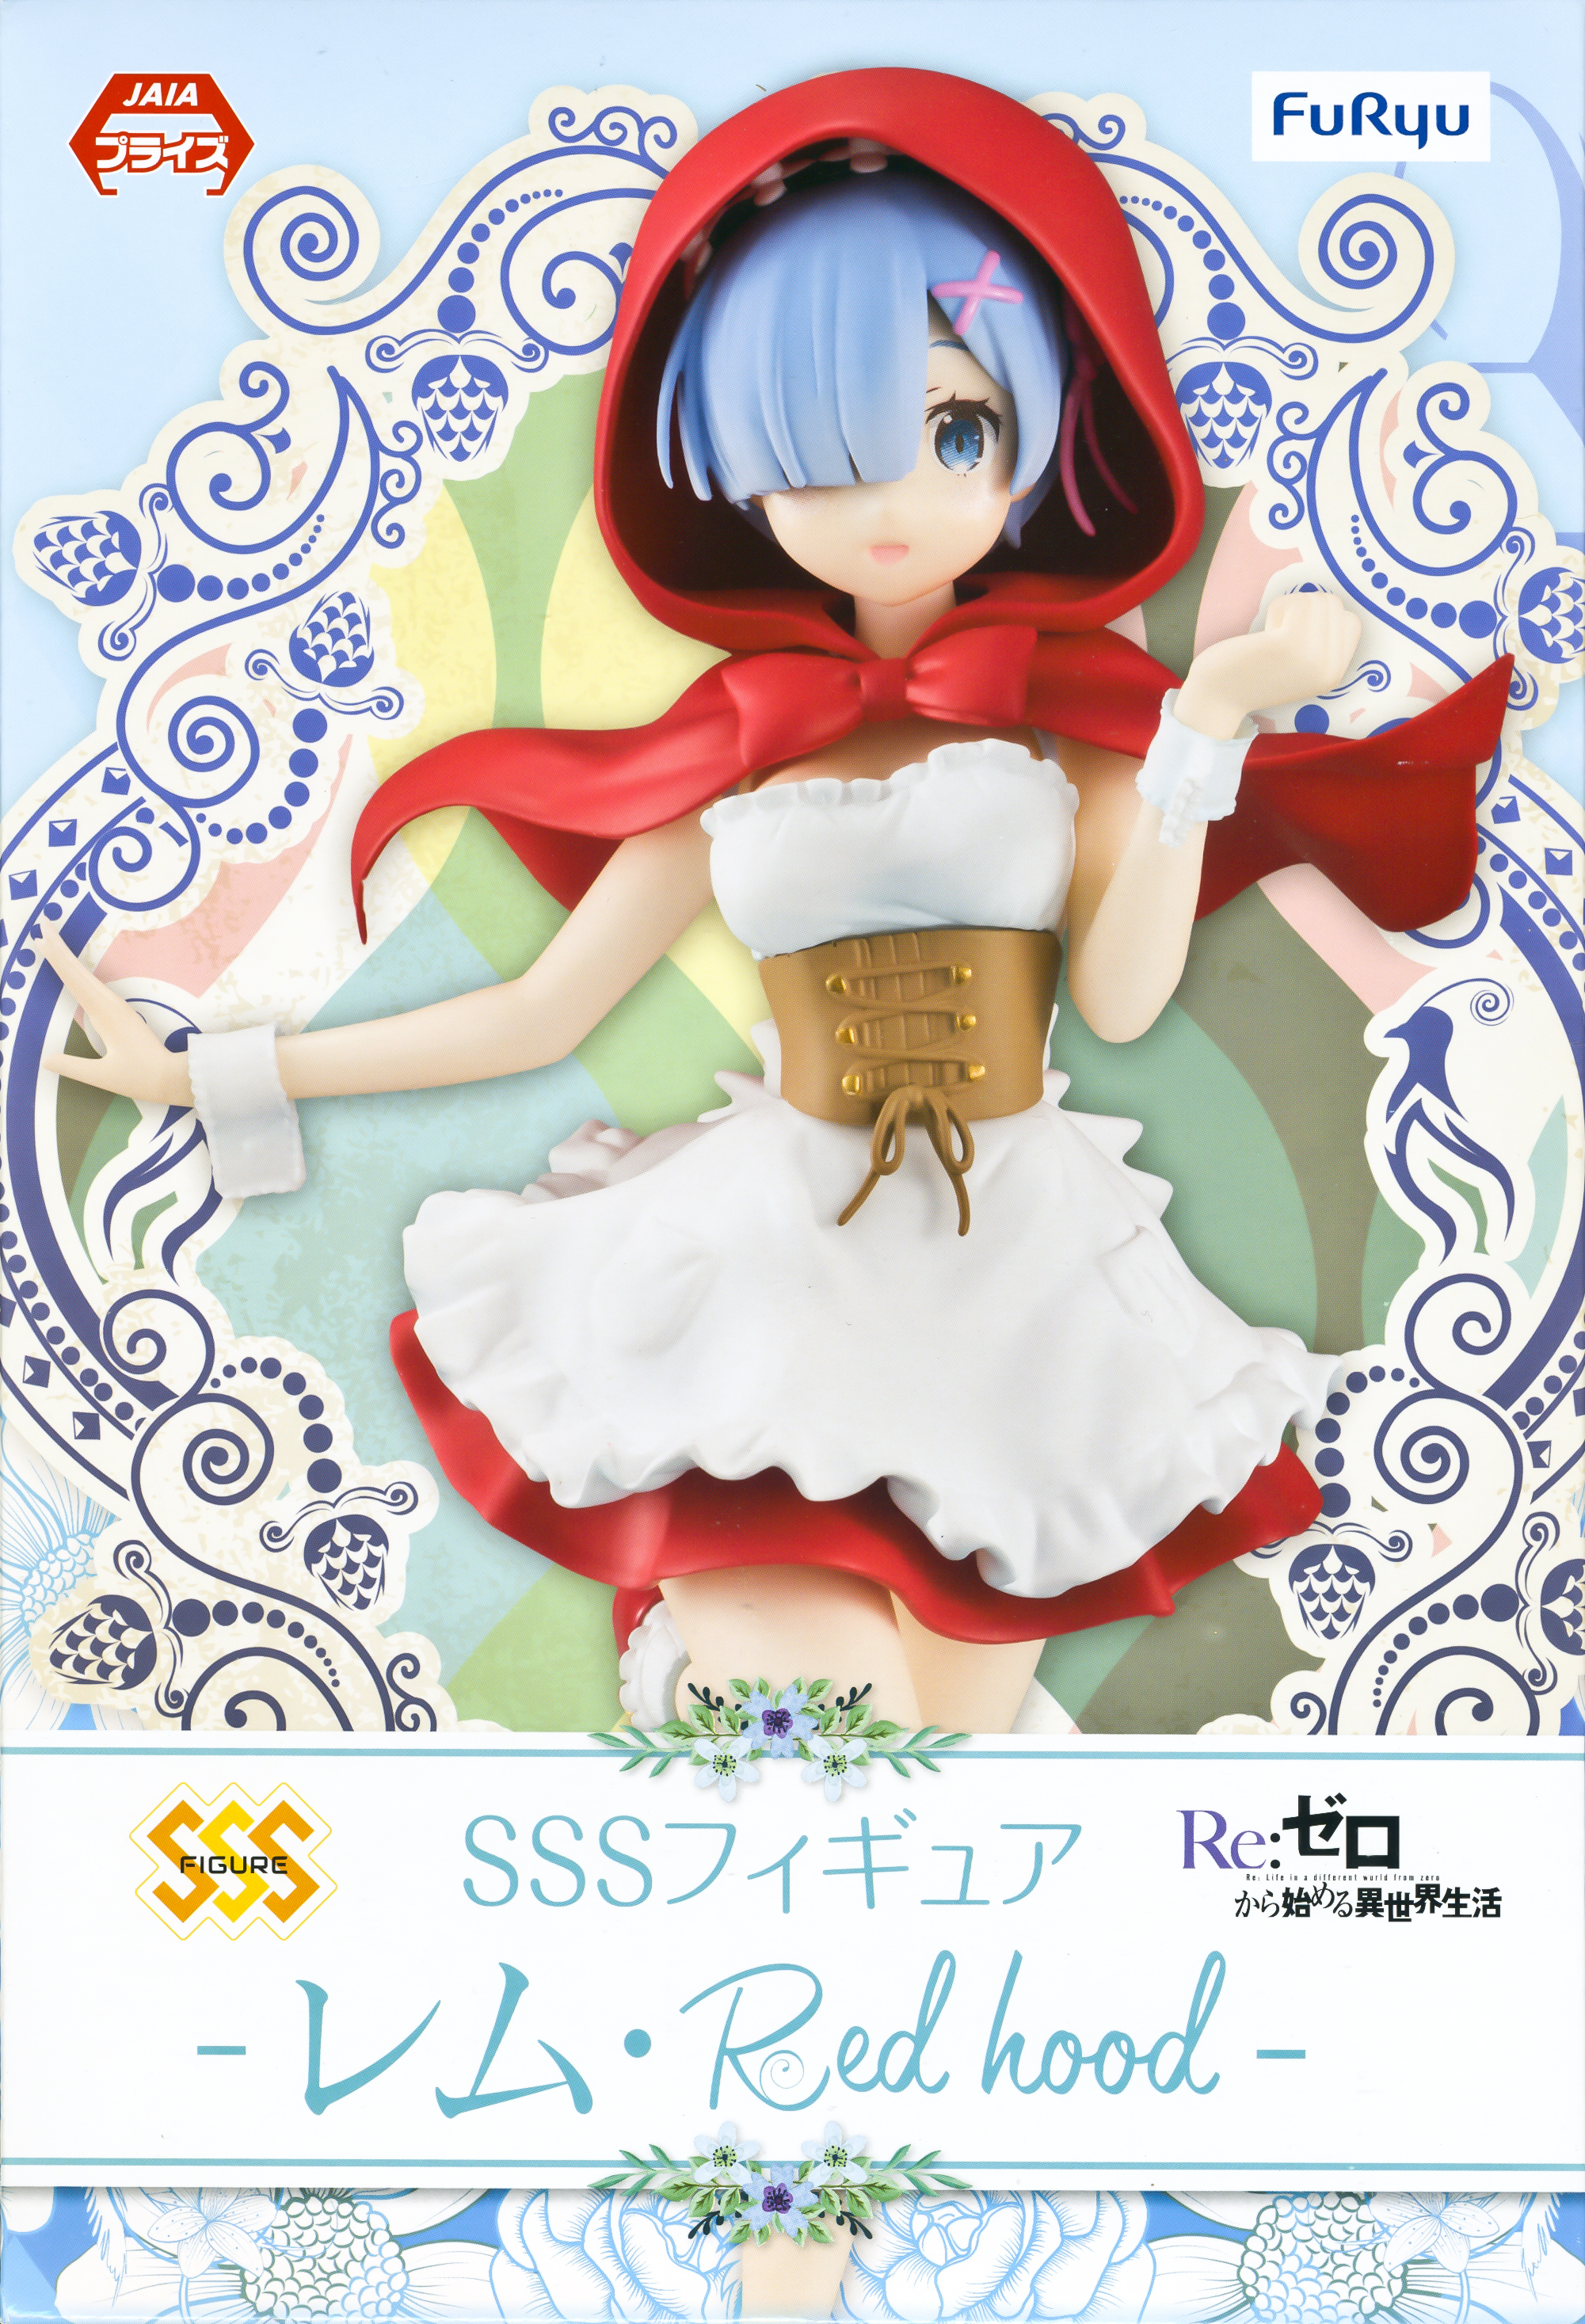 Rem, Red Hood Figure, Re:Zero - Starting Life in Another World, SSS Figure, Furyu